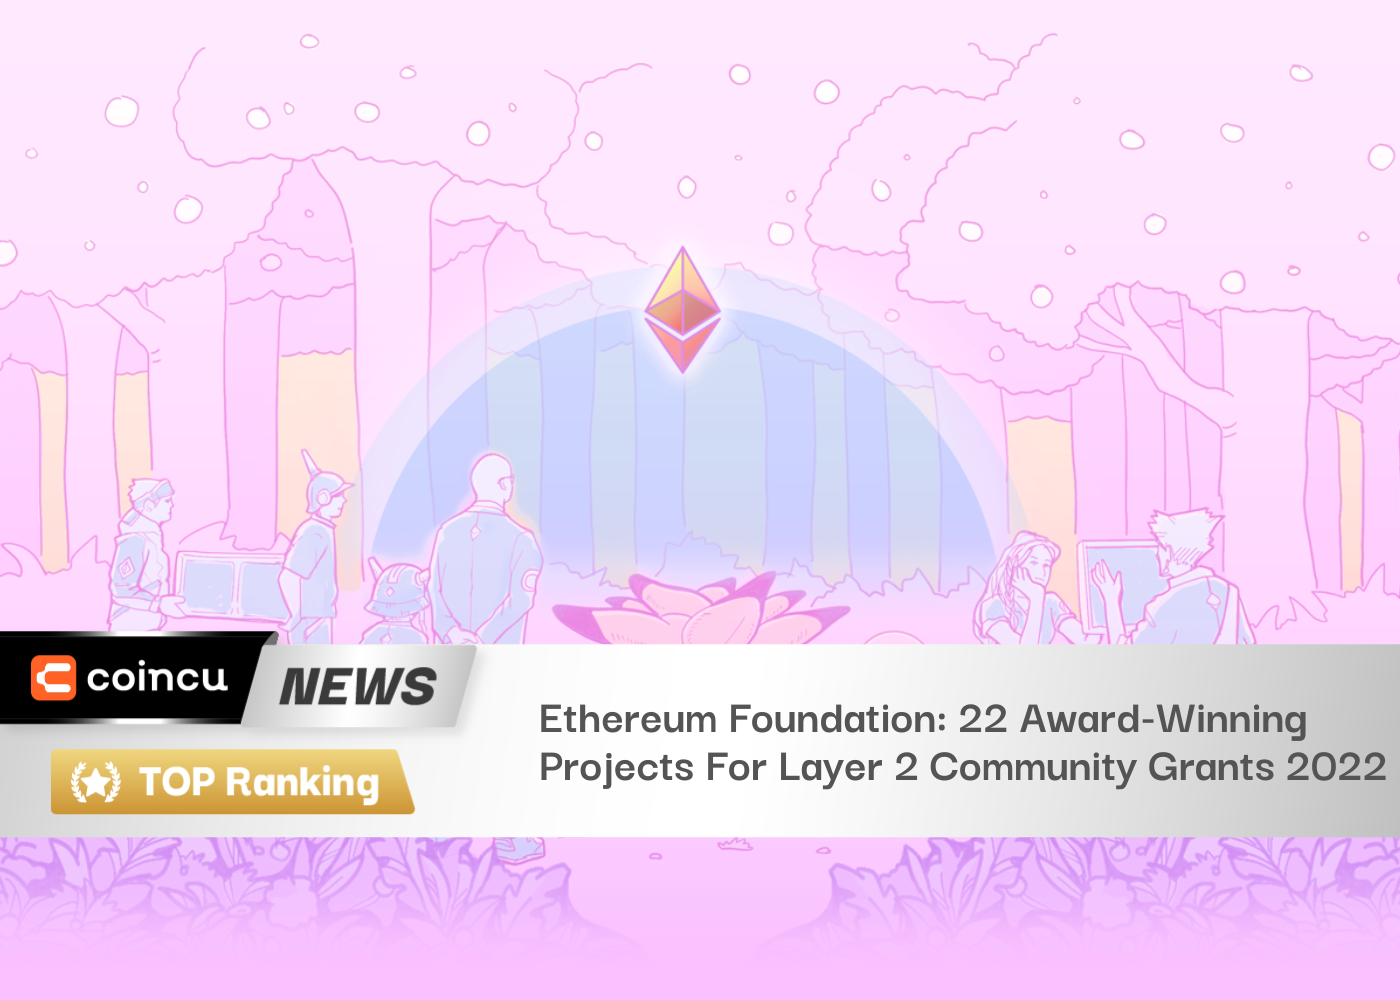 Ethereum Foundation: 22 Award-Winning Projects For Layer 2 Community Grants 2022